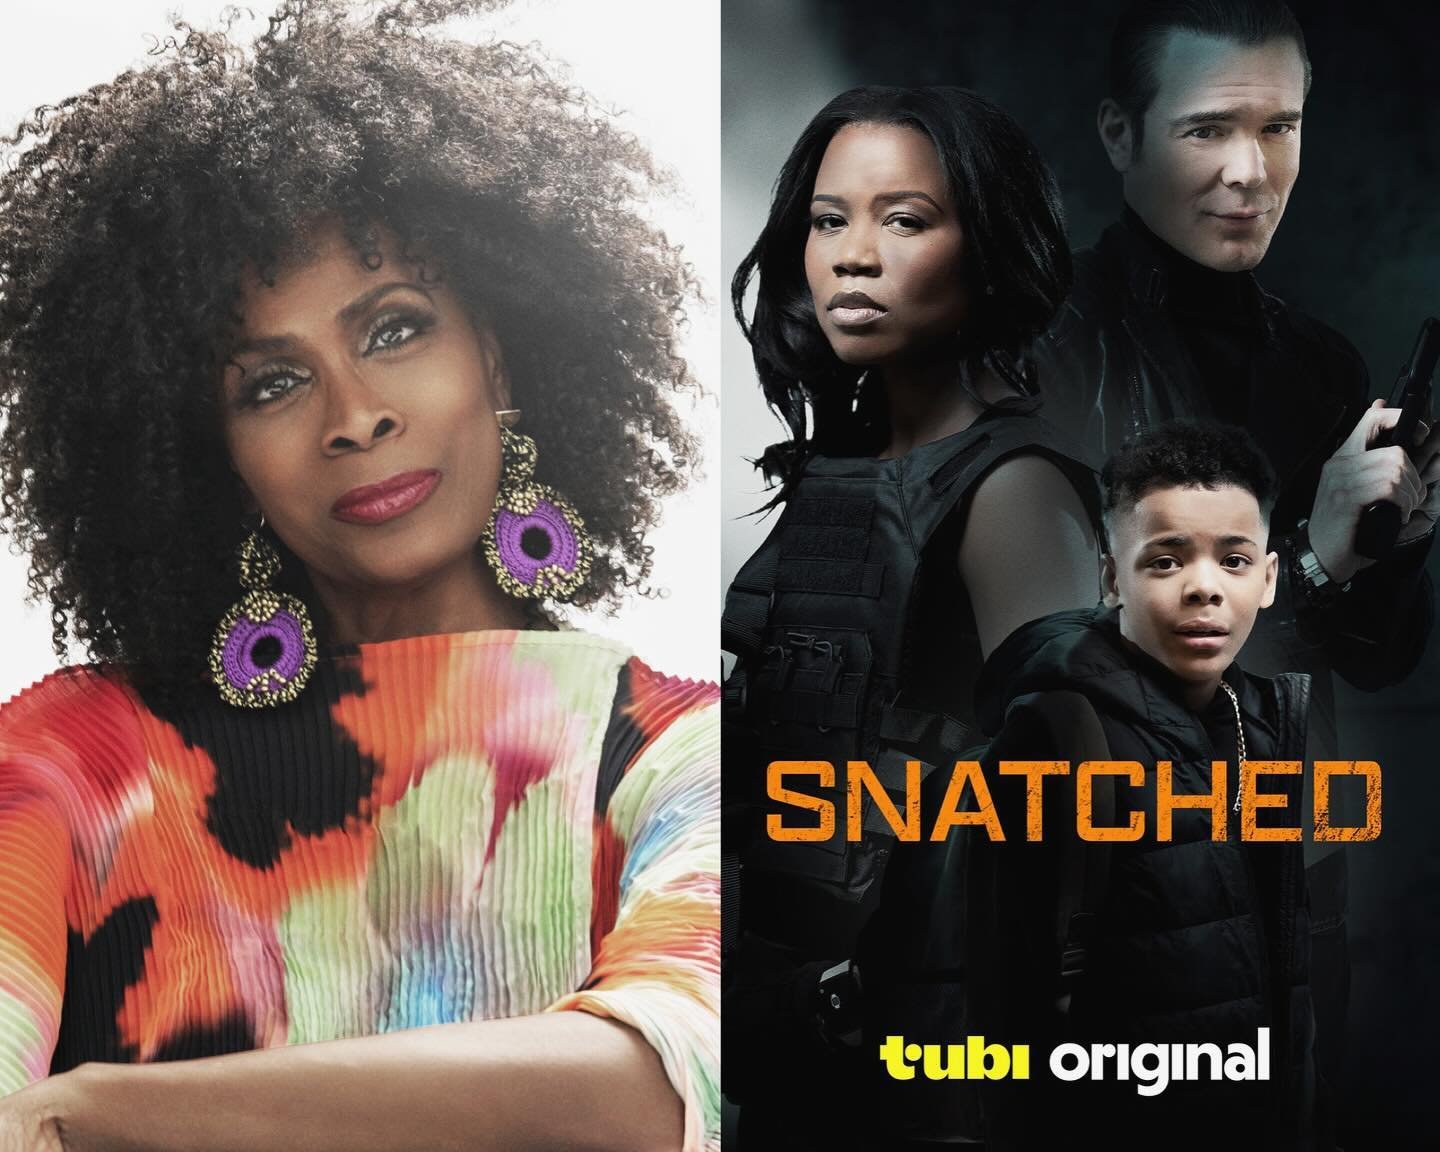 Janet Hubert stars in the new film SNATCHED - streaming today on @tubi! ⭐️